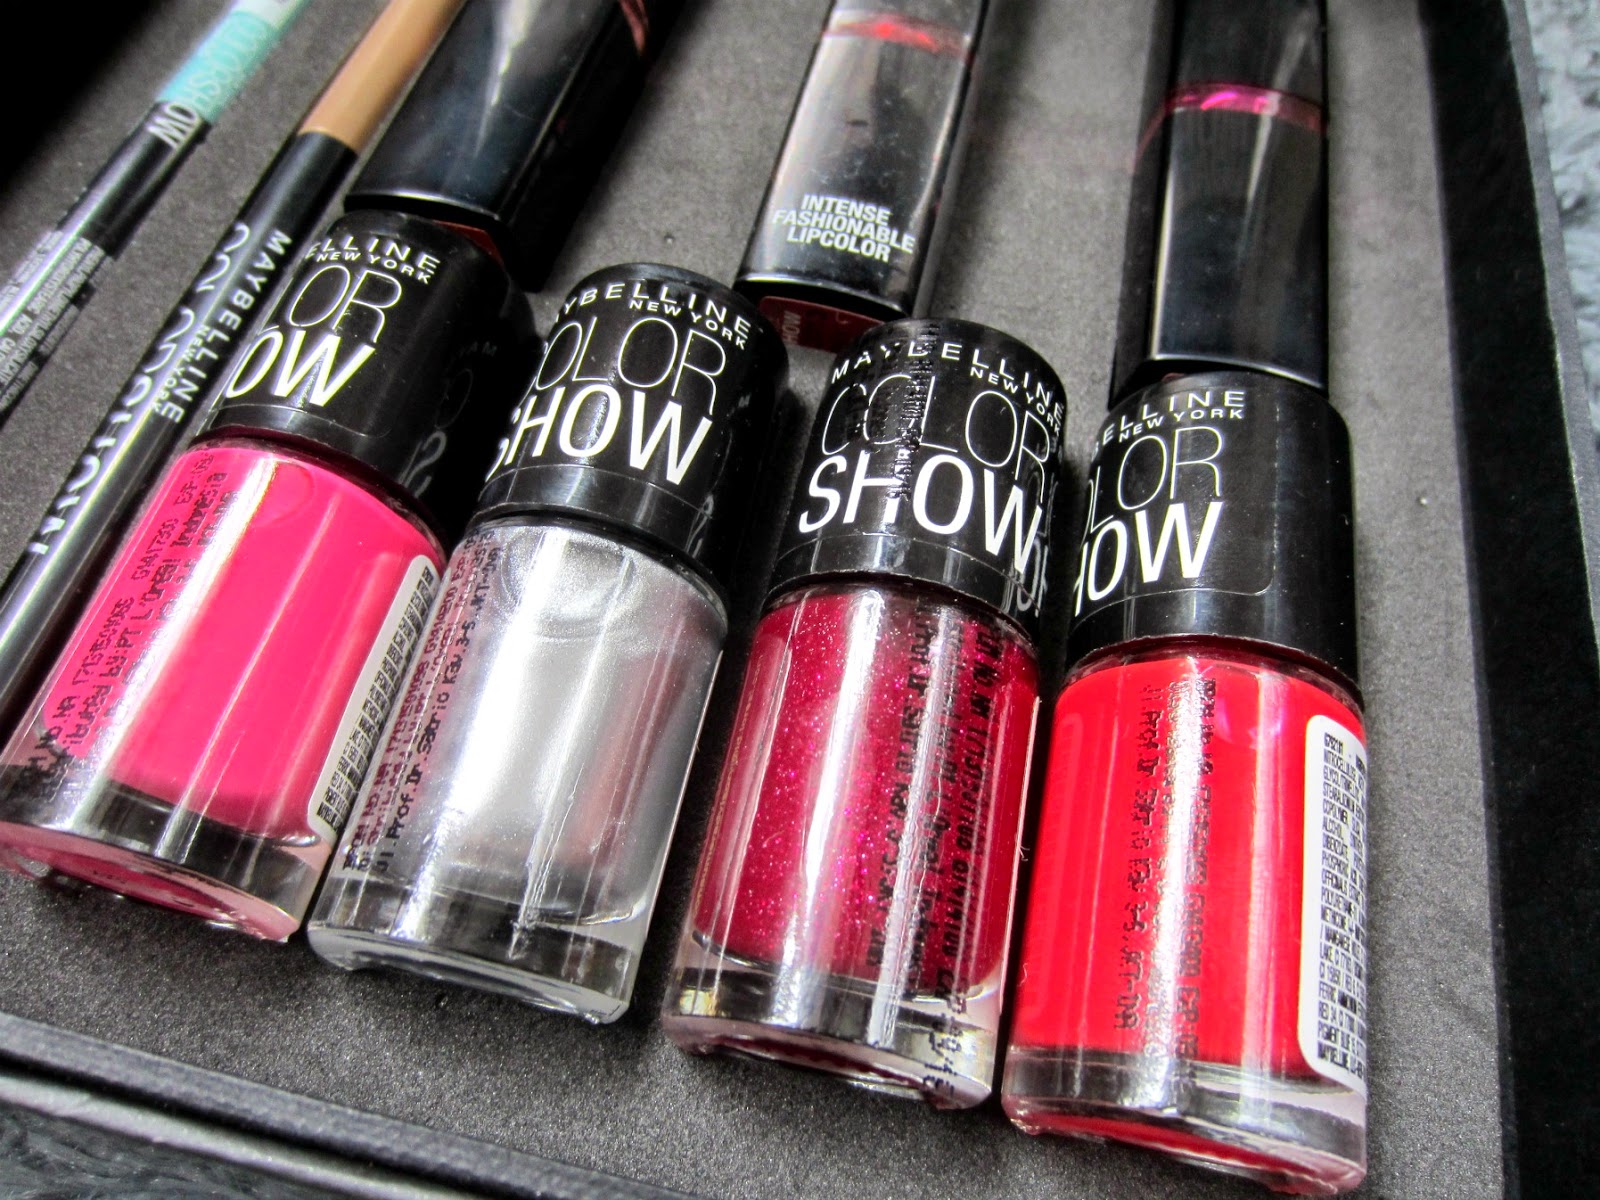 Maybelline Color Show Nail Polish - wide 7